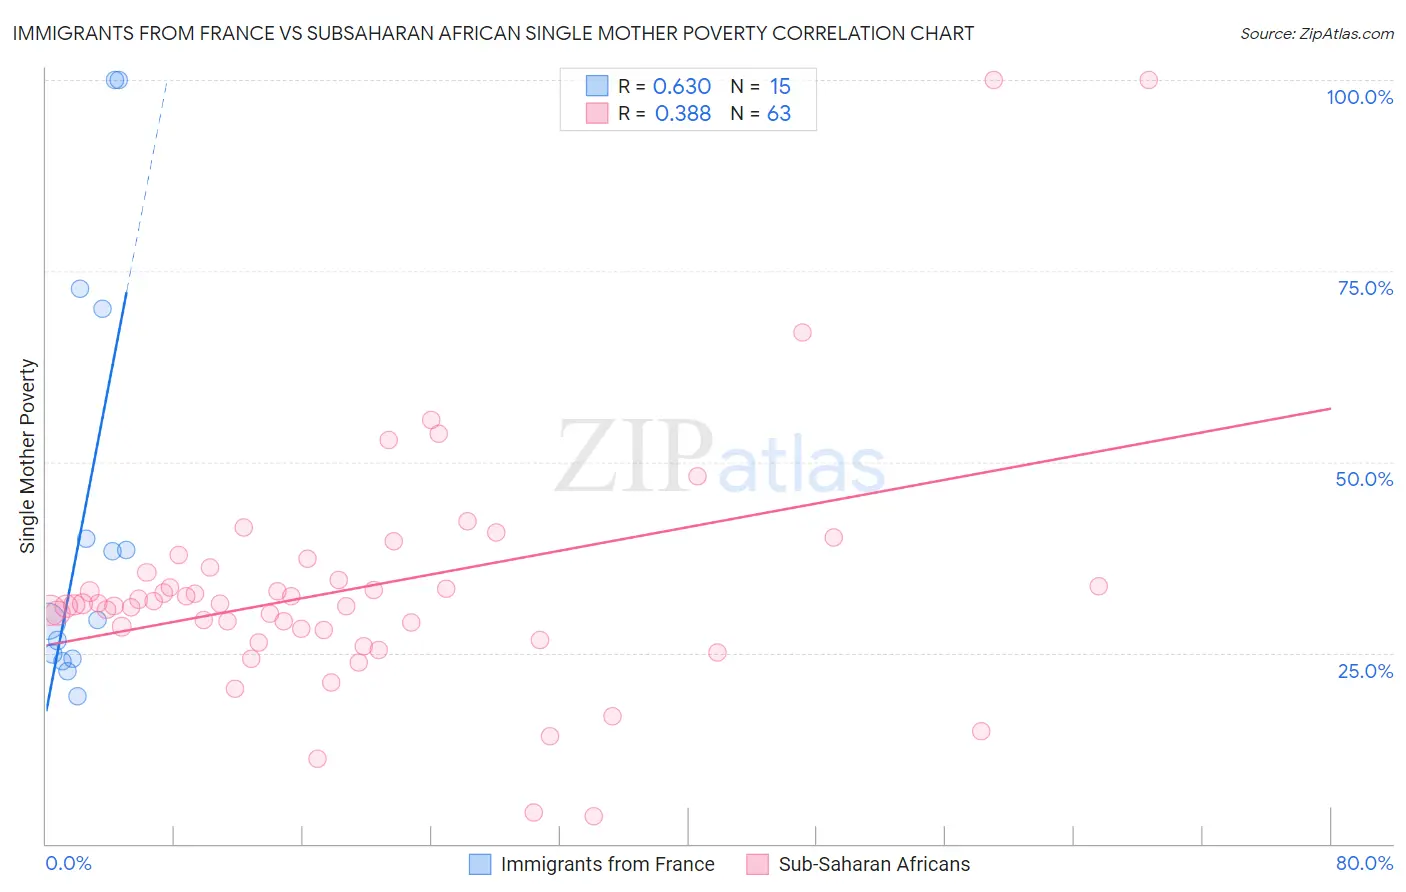 Immigrants from France vs Subsaharan African Single Mother Poverty